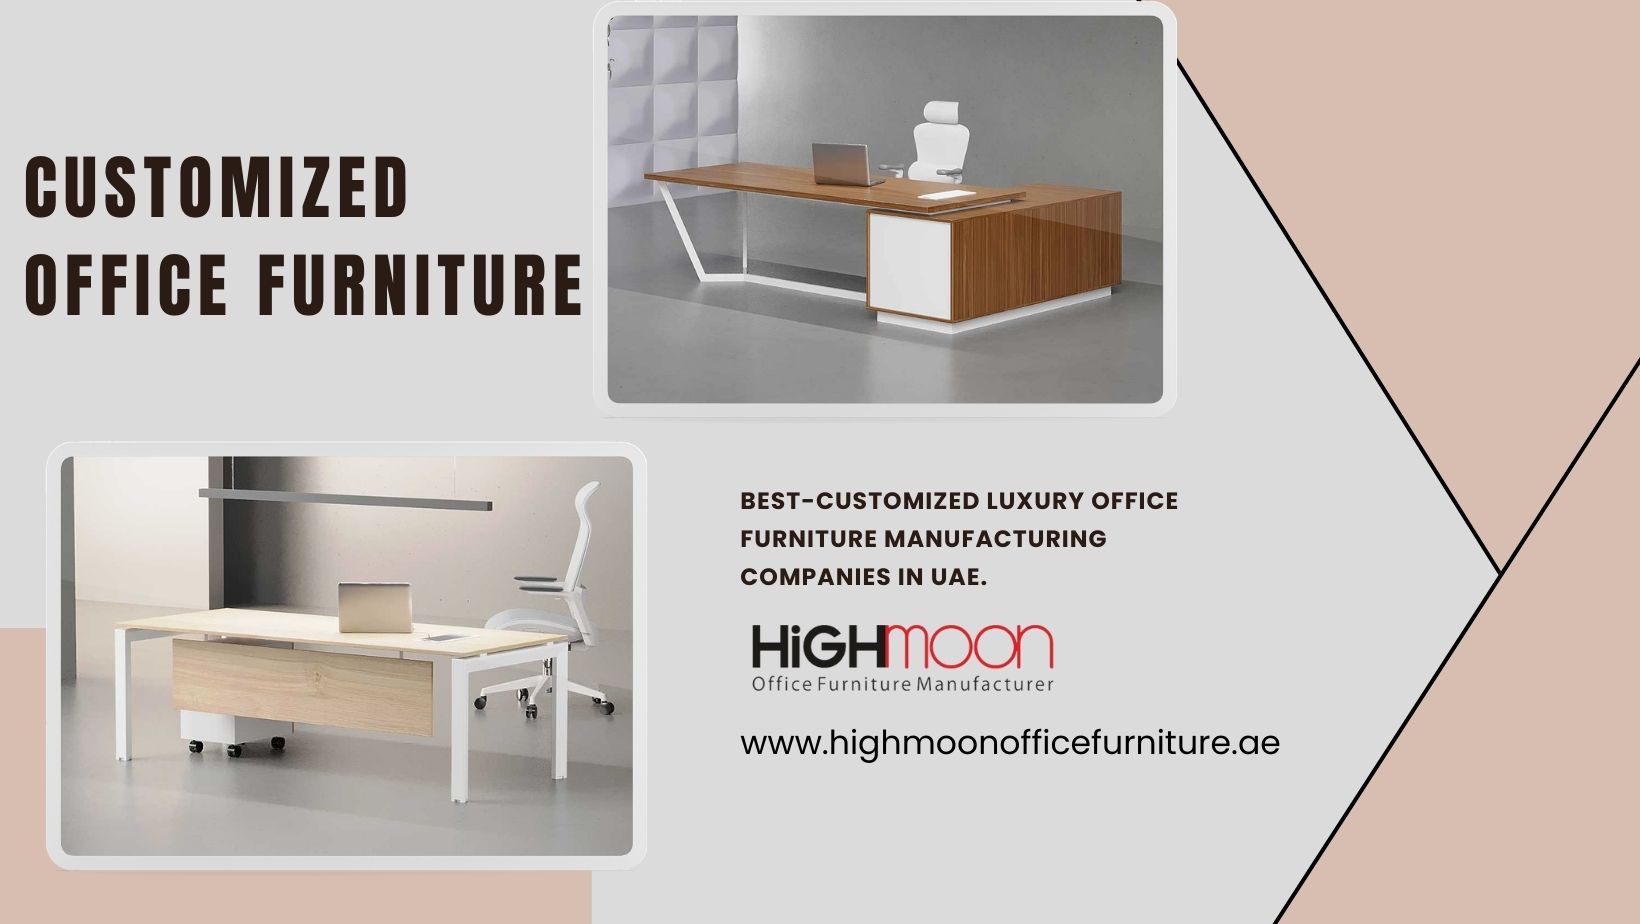 Customized Office Furniture – Top Quality Custom Made Office furniture